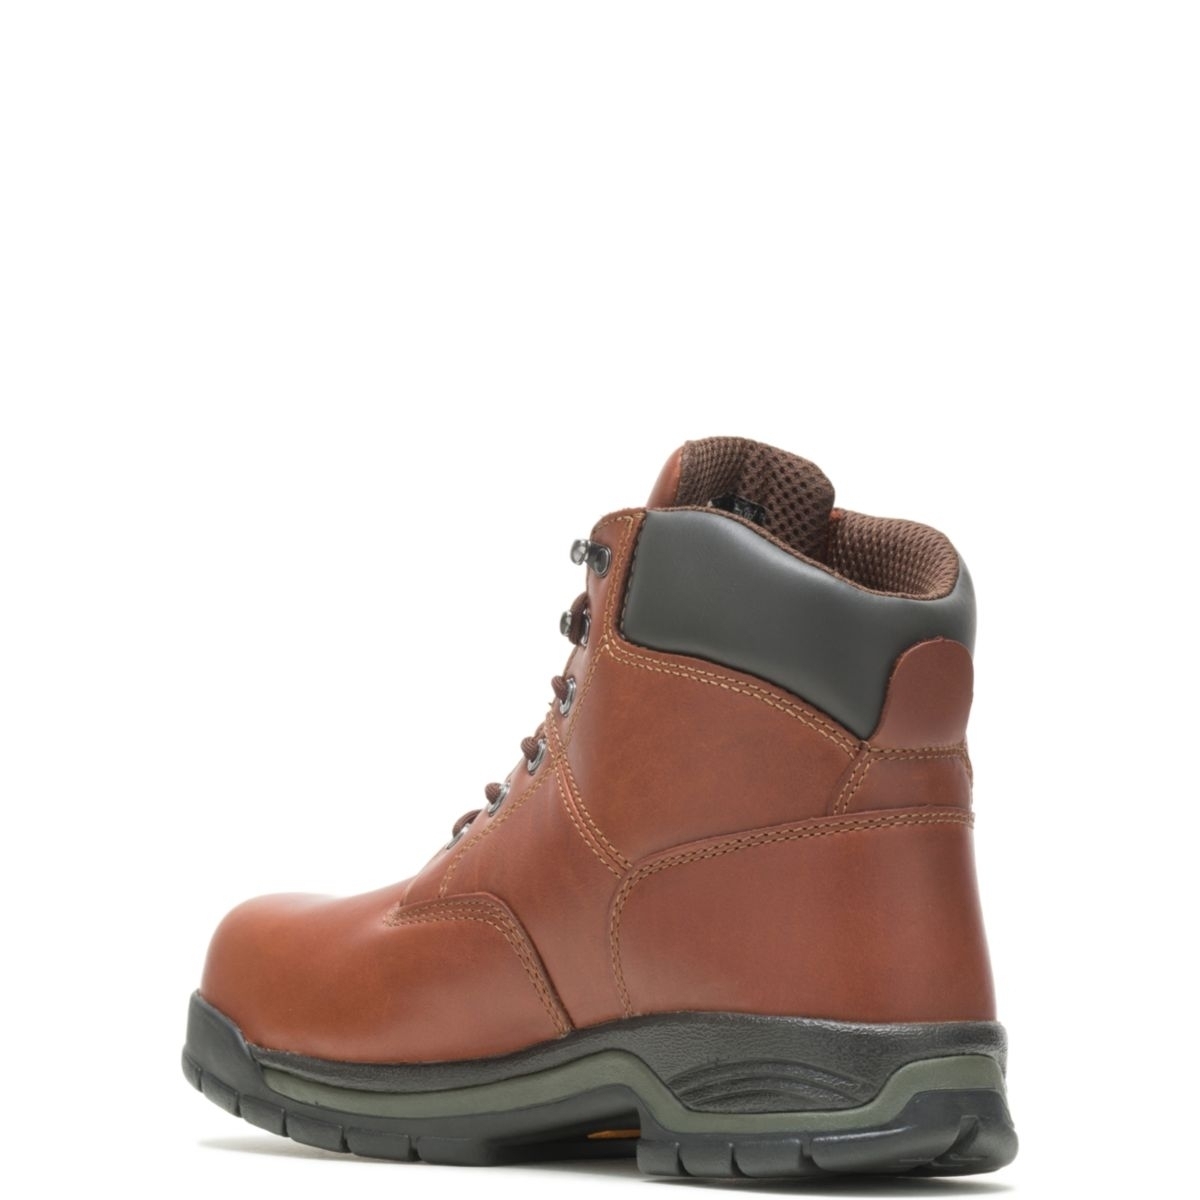 WOLVERINE Men's Harrison 6 Lace-Up Steel Toe Work Boot Brown - W04904 BROWN LEATHER - BROWN LEATHER, 8